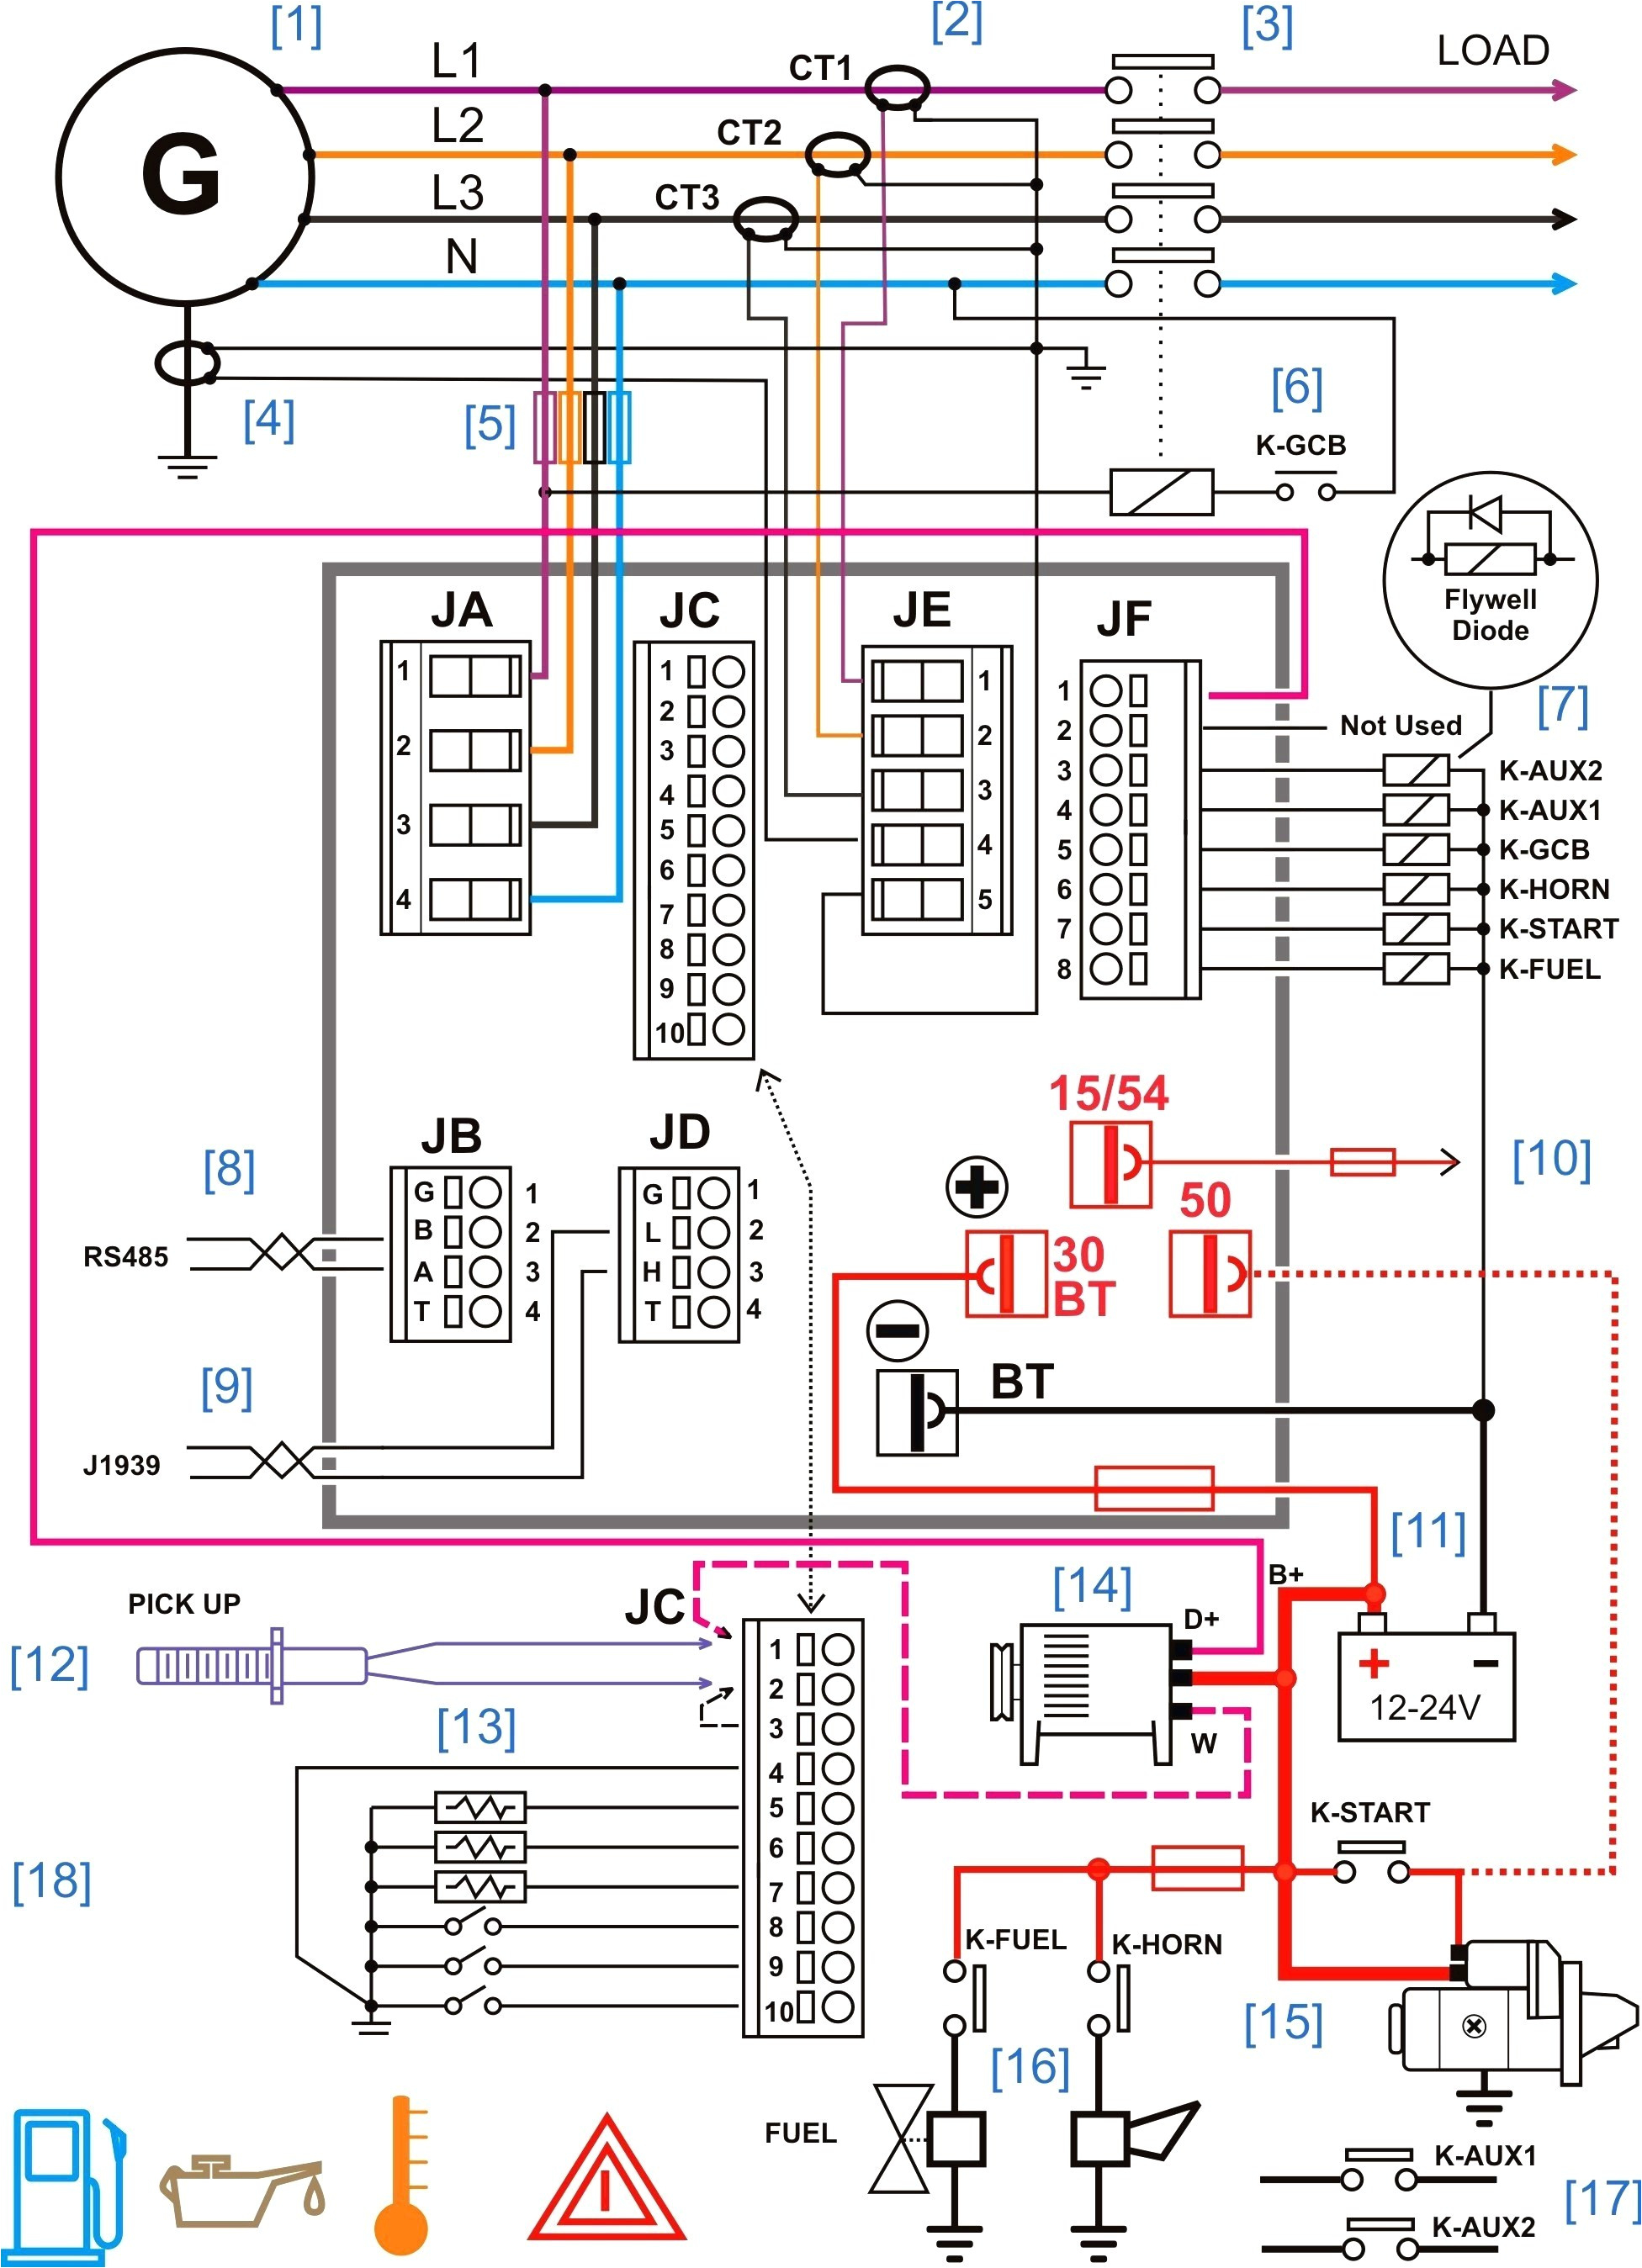 audi a4 stereo wiring diagram awesome audi tt mk2 wiring diagramaudi a4 stereo wiring diagram best